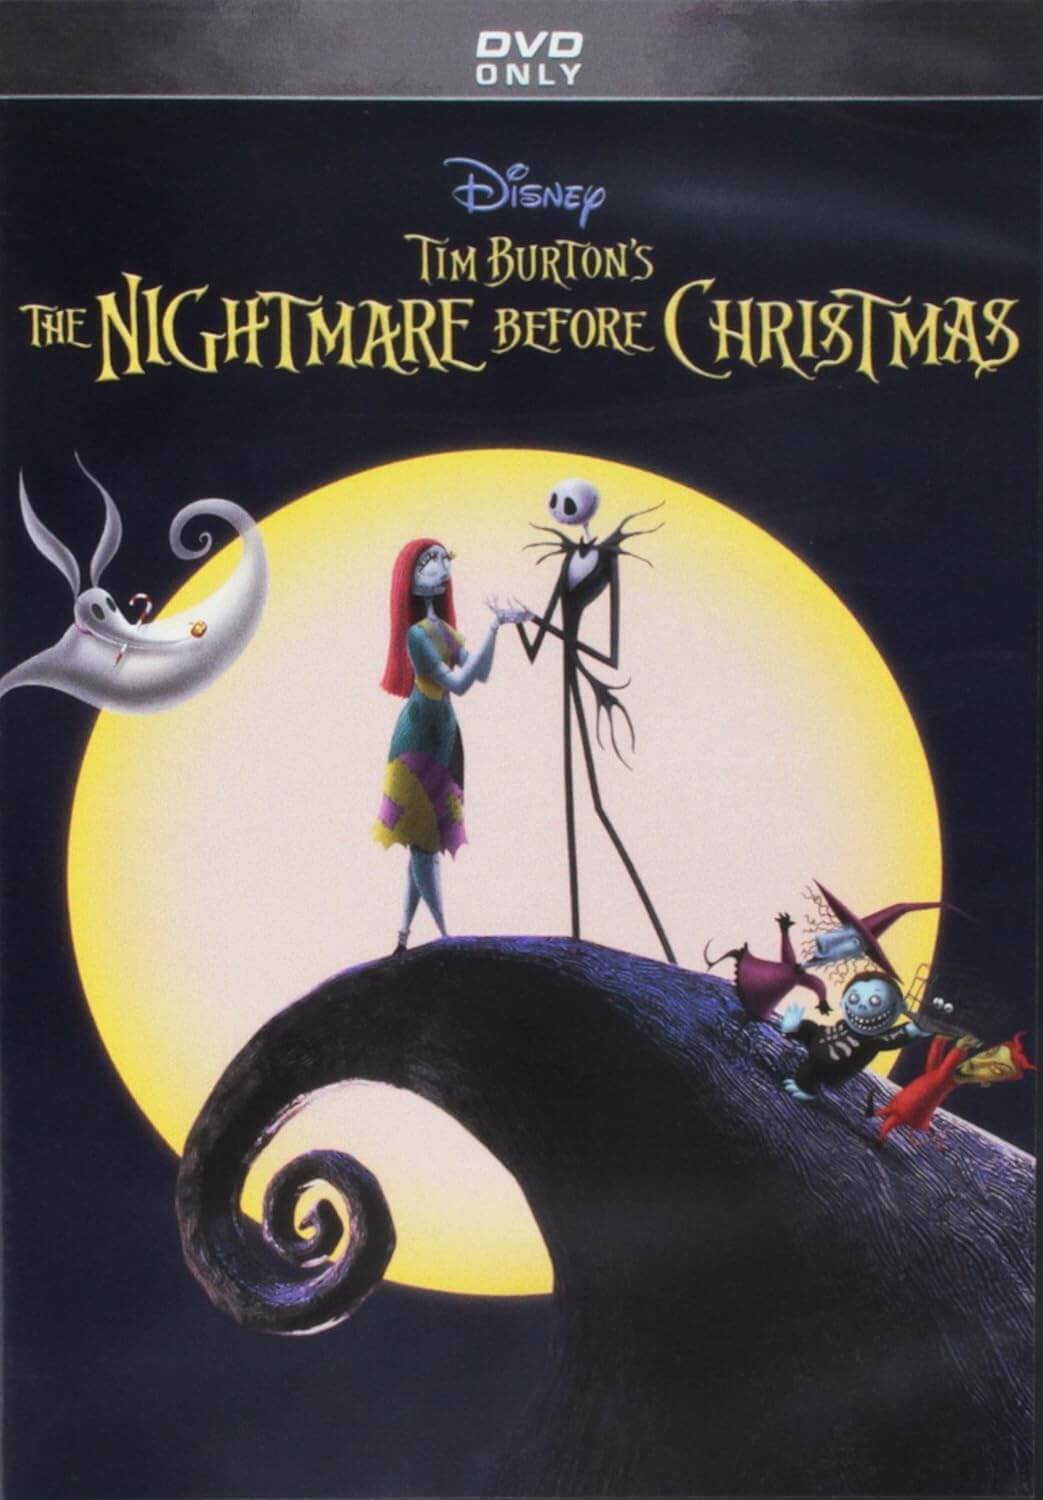  "The Nightmare Before Christmas" (1993)